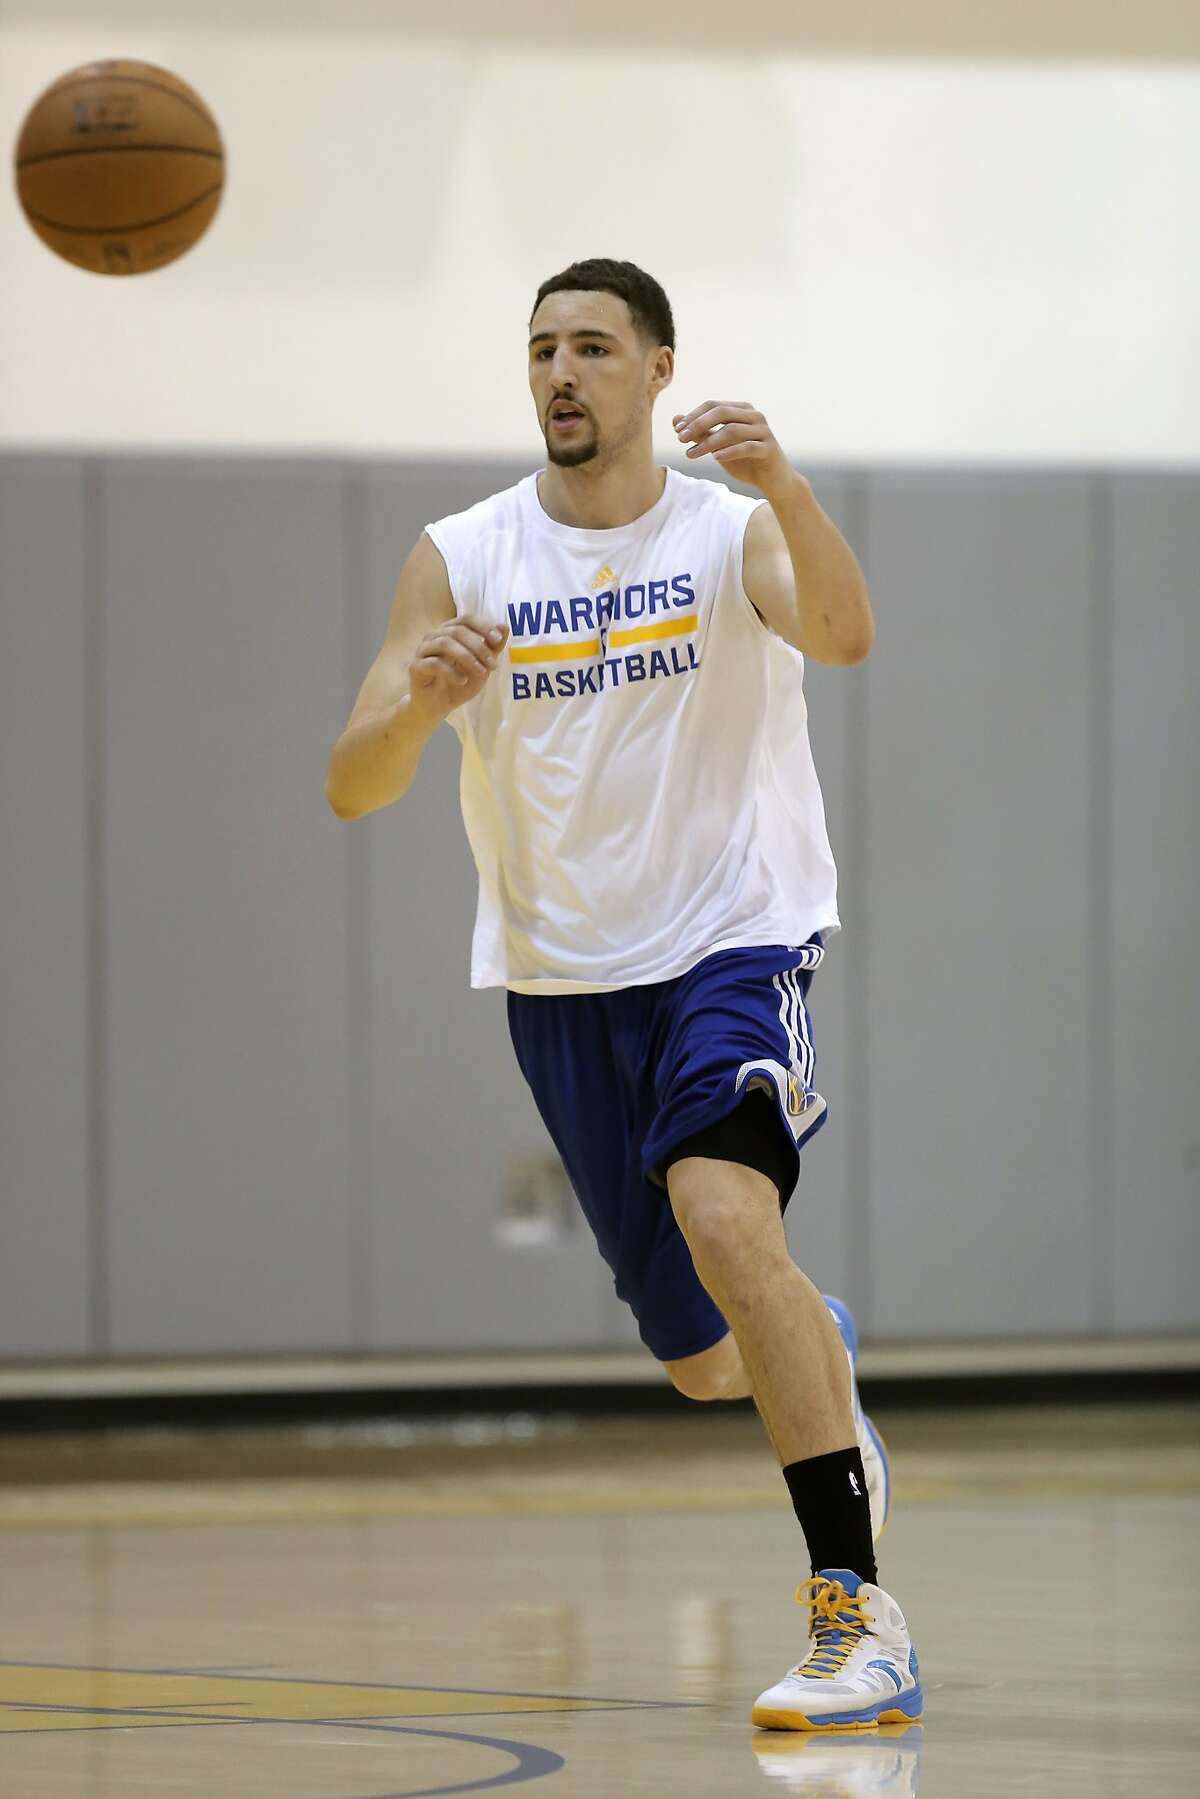 Klay Thompson during practice as the Golden State Warriors hold a media availability at their practice facility in Oakland, Calif., on Tues. June 2, 2015, as they prepare for game one of the NBA finals later this week.